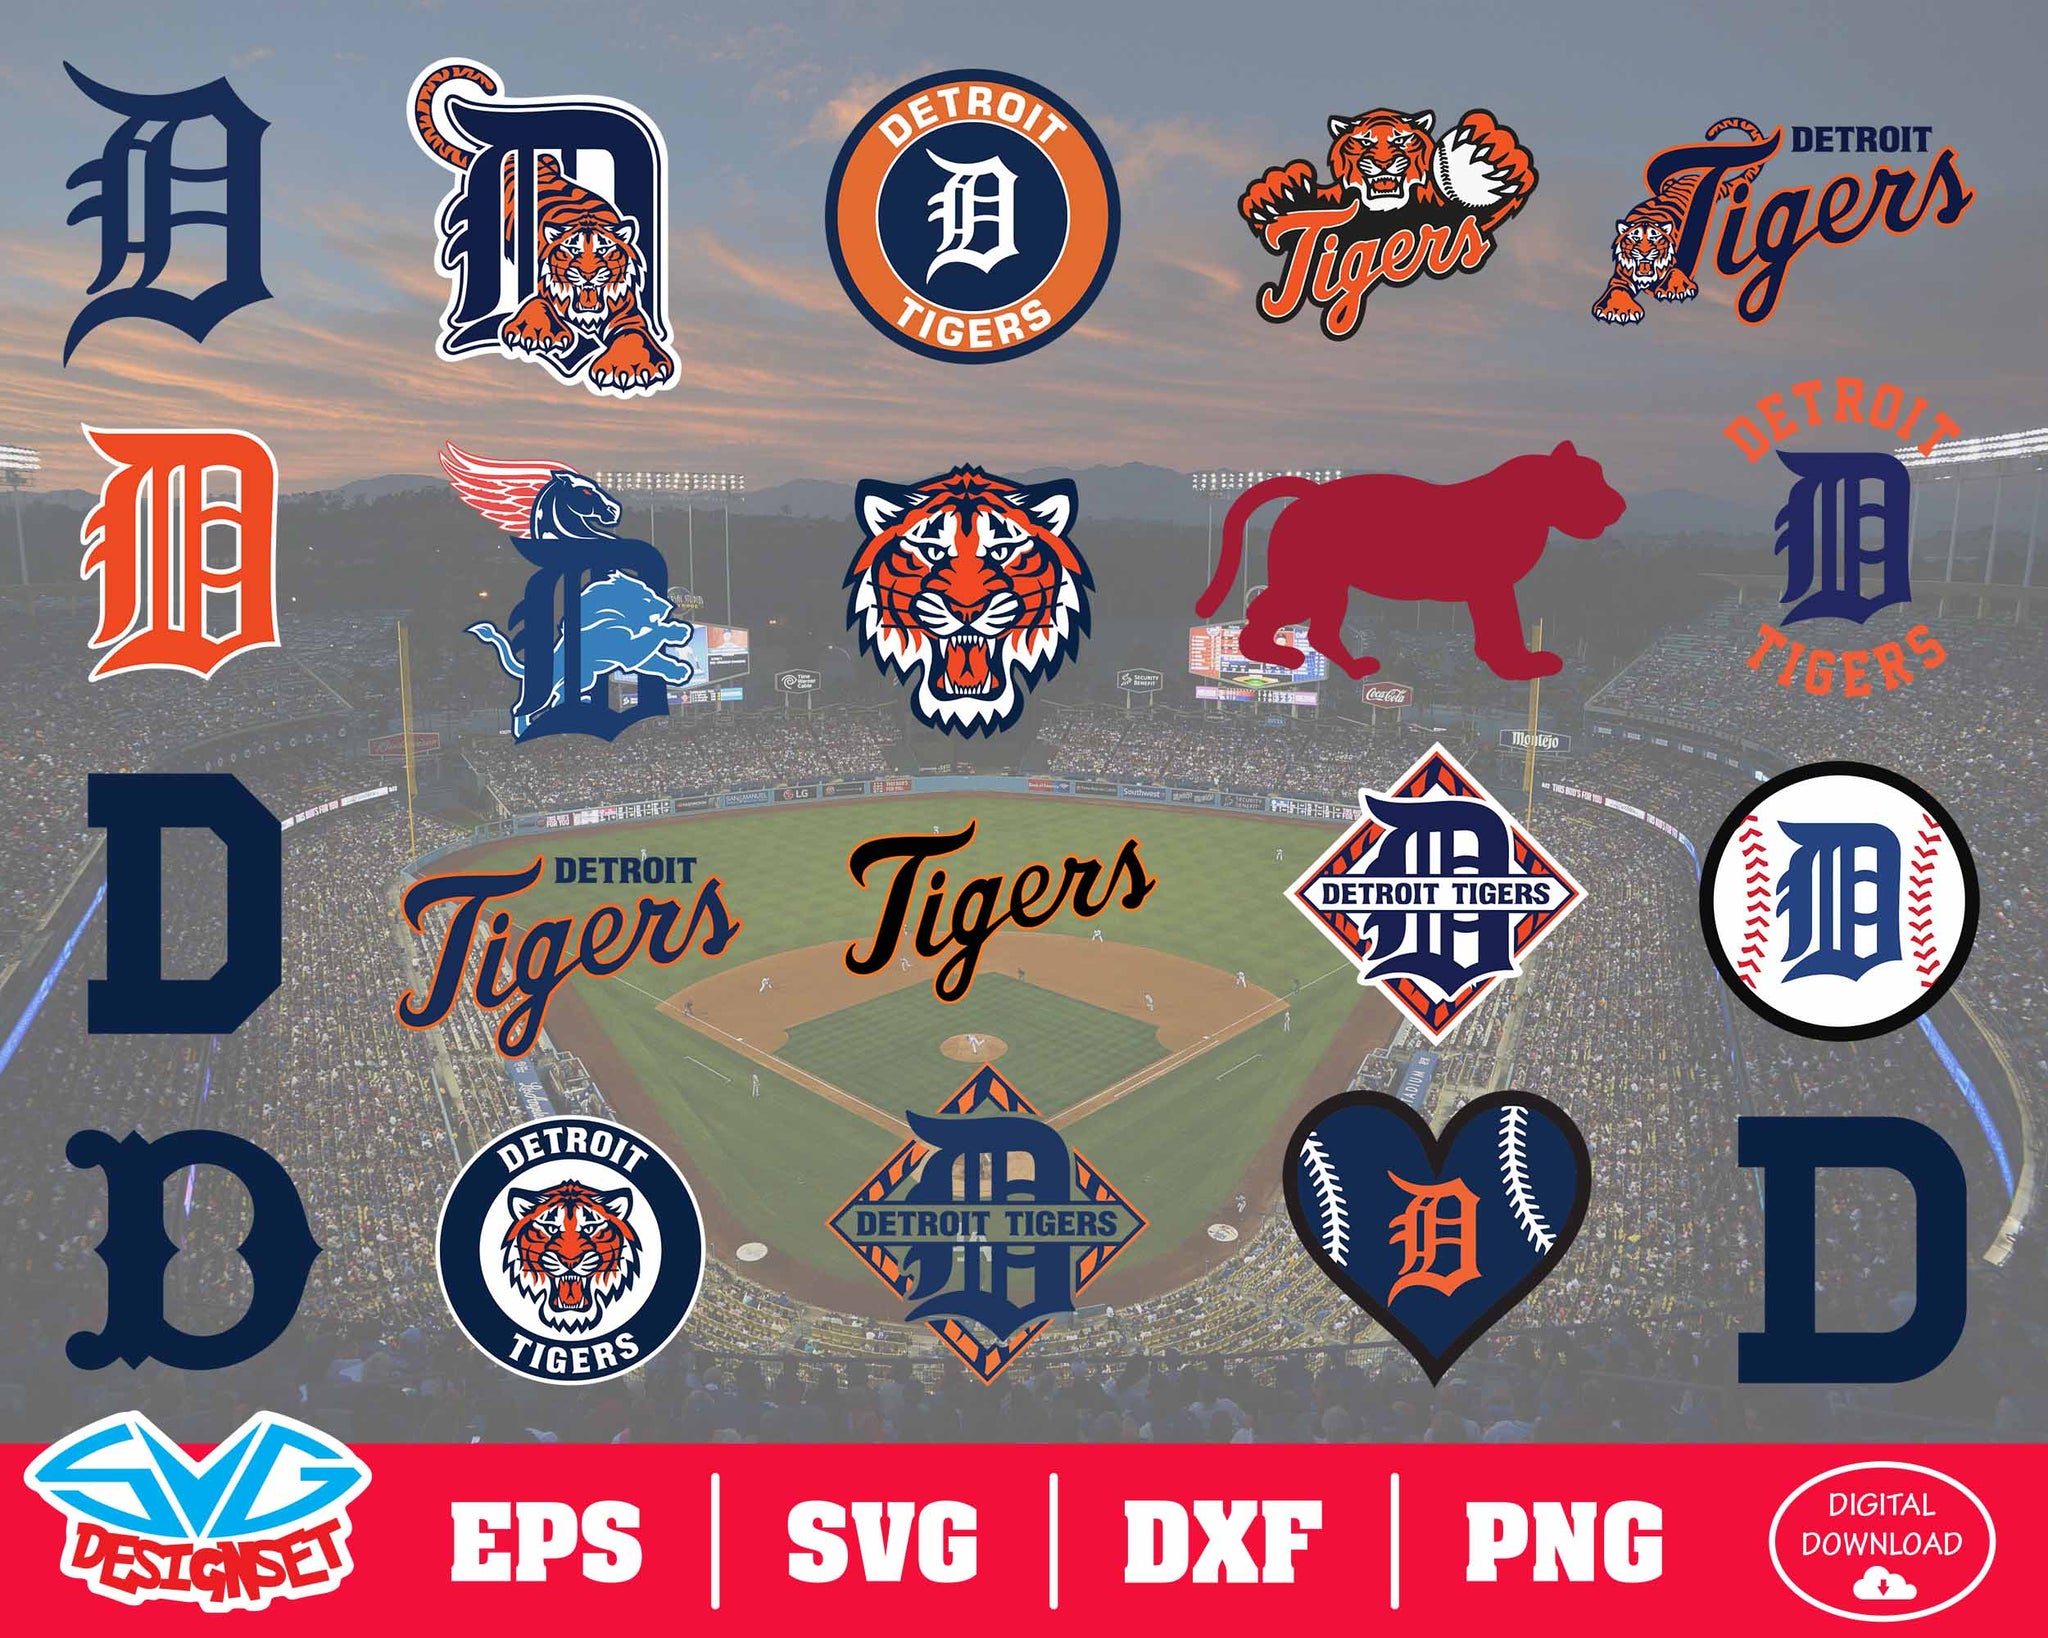 Detroit Tigers Team Svg, Dxf, Eps, Png, Clipart, Silhouette and Cutfil